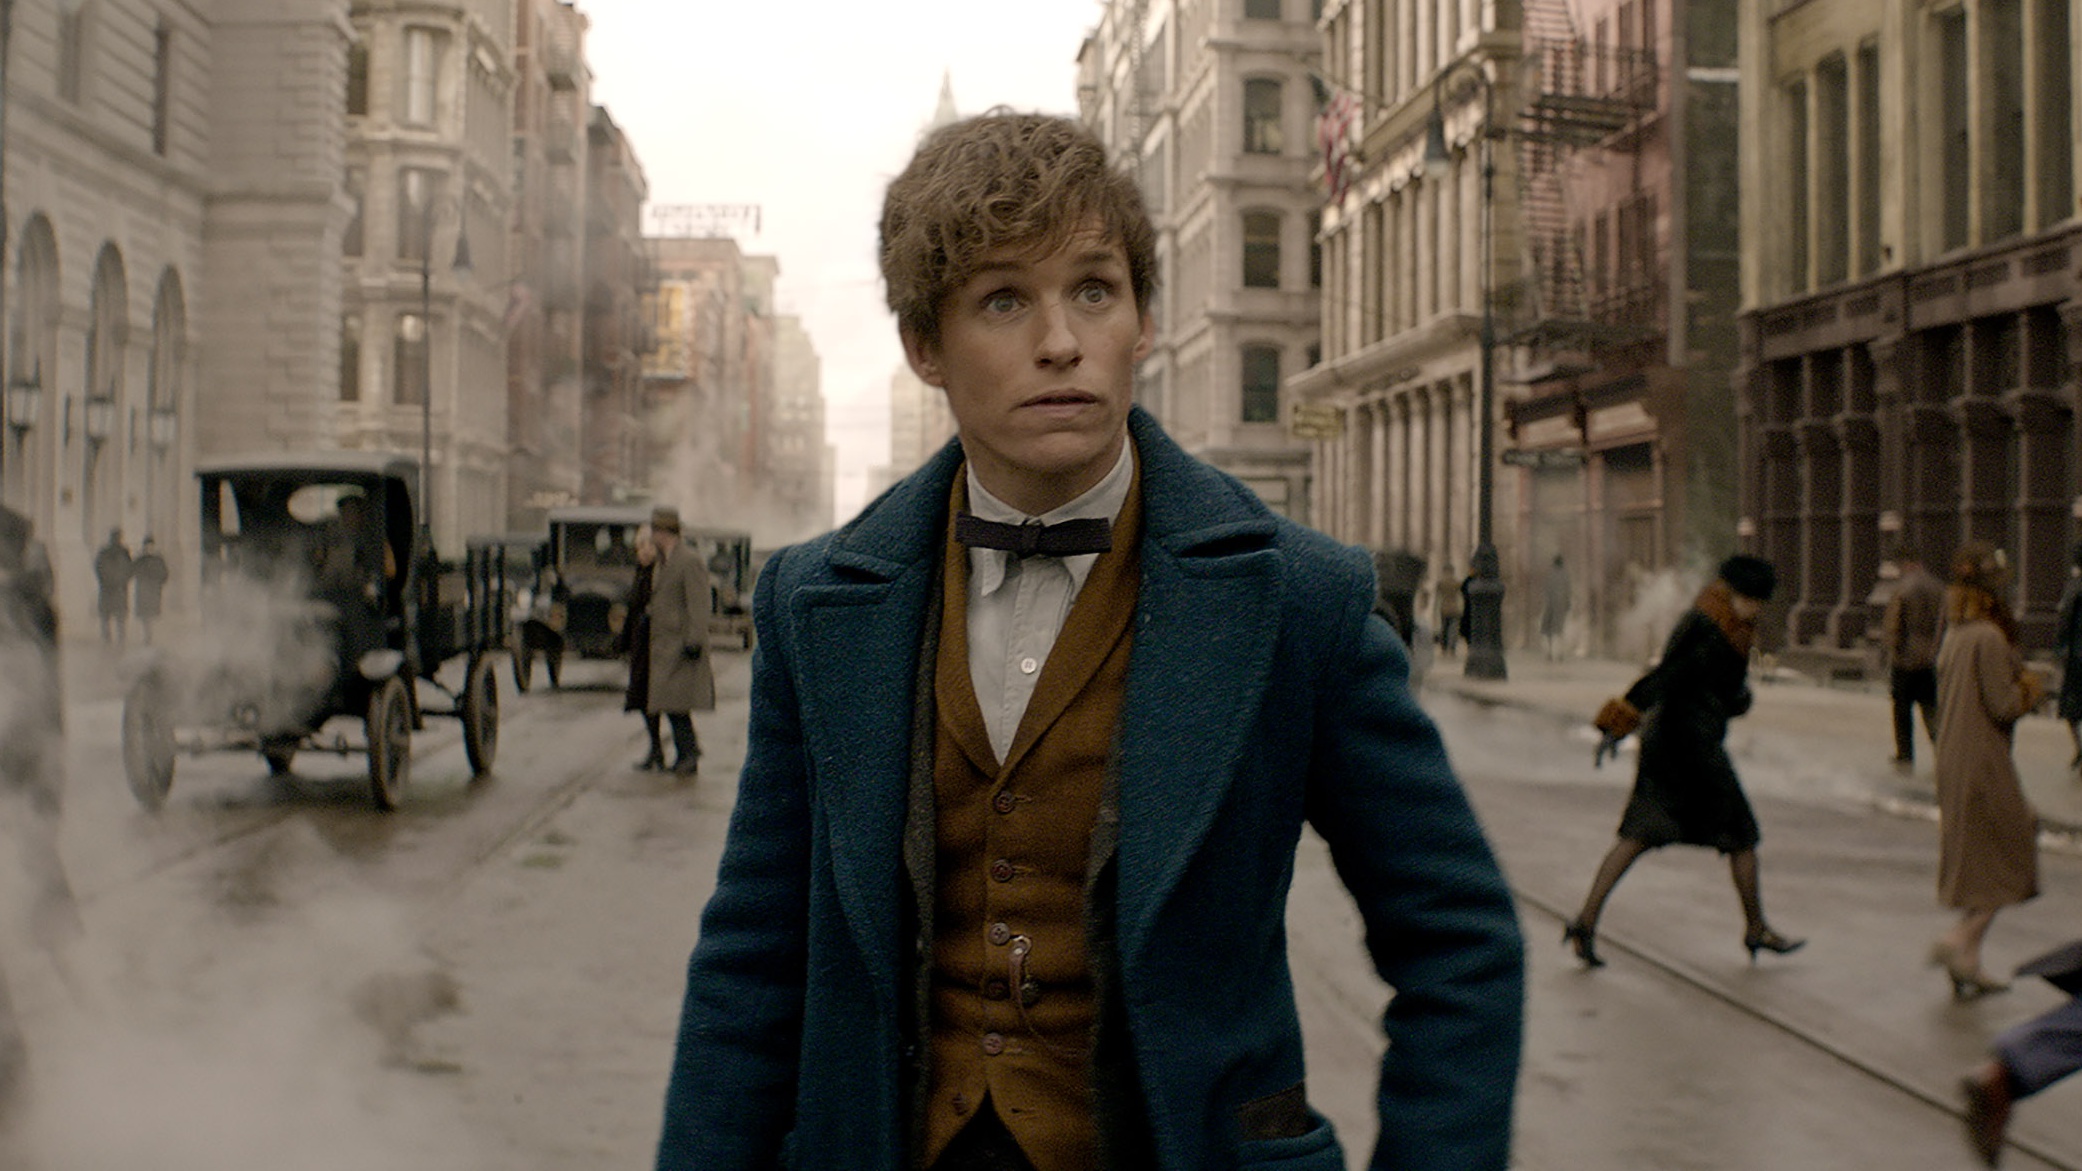 Movie Watch Online Hd Fantastic Beasts And Where To Find Them 2016